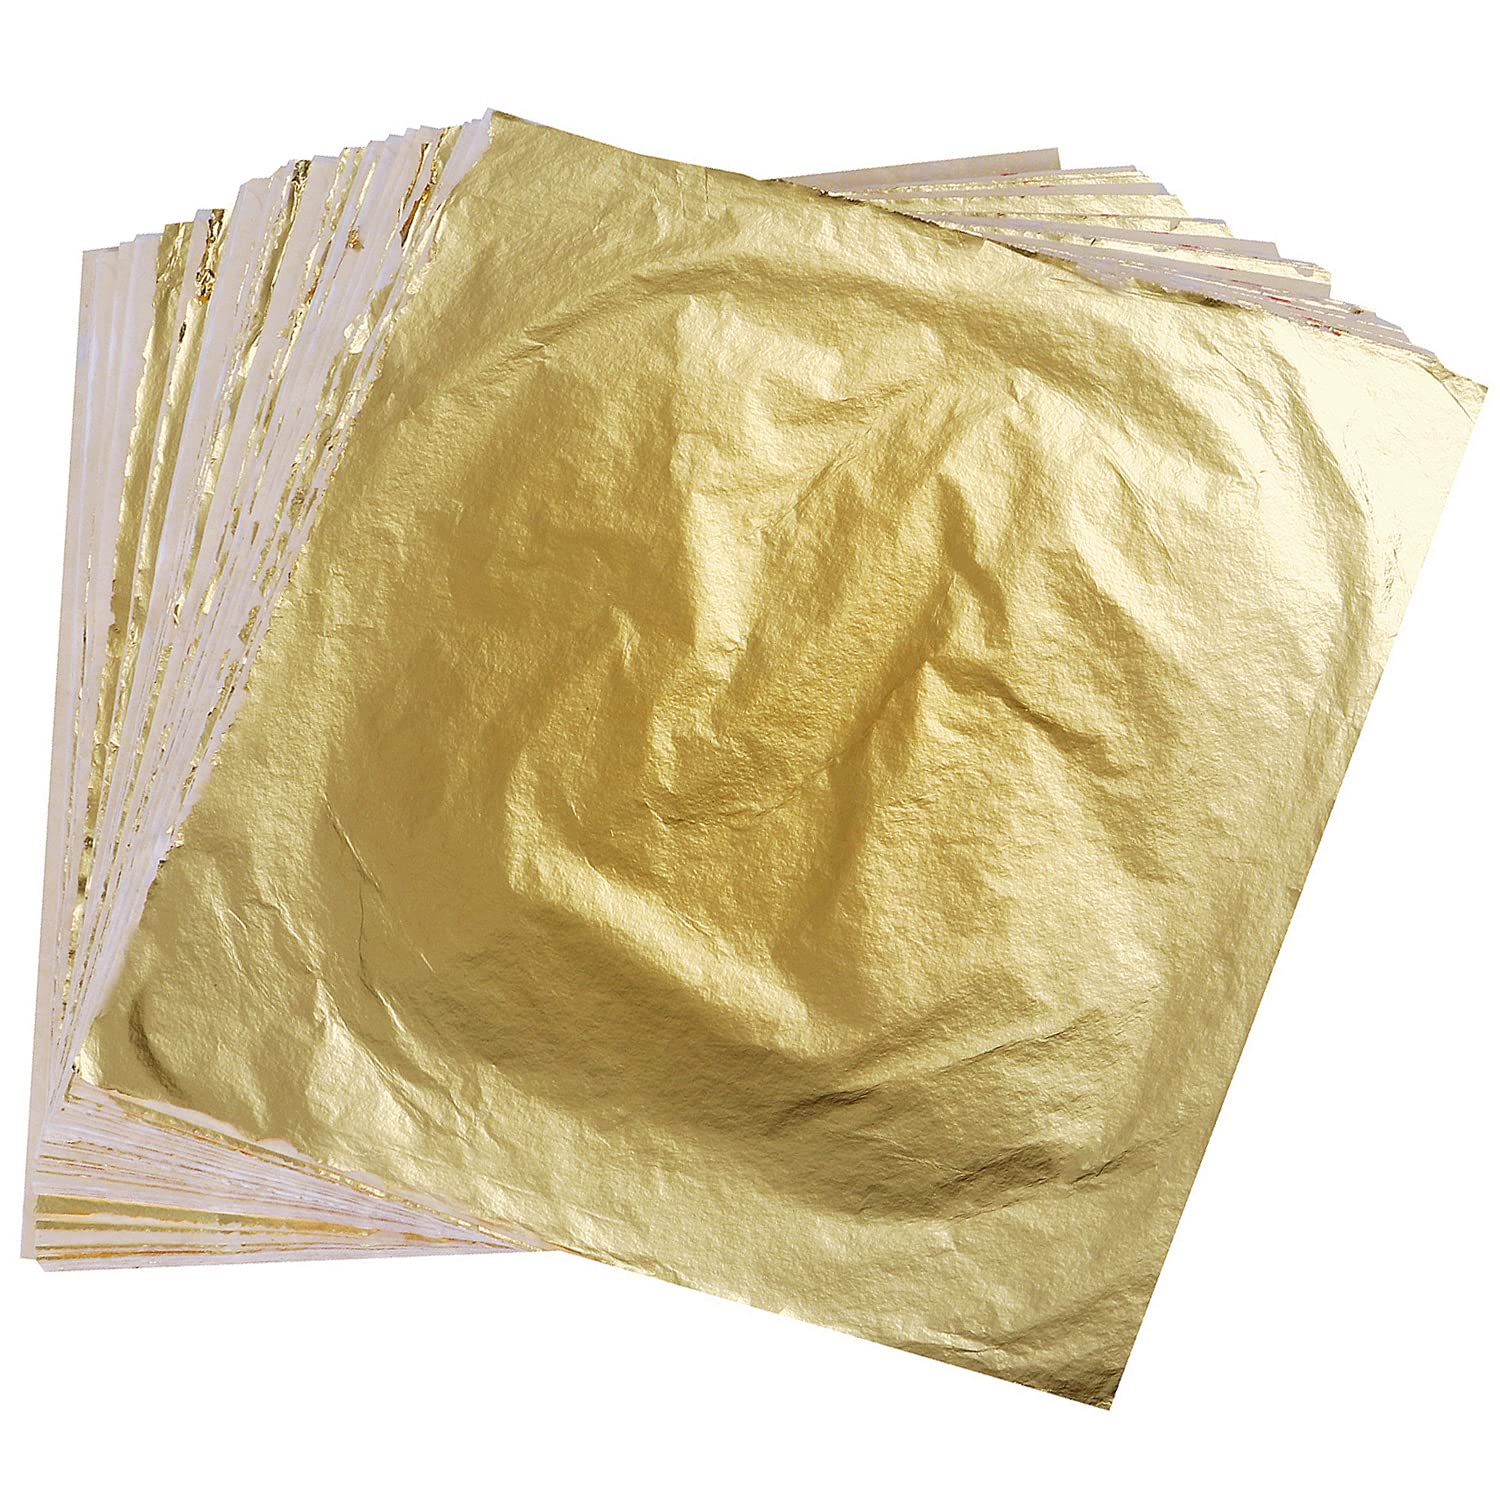 Verlimk 100 Sheets Imitation Gold Leaf for Painting, Arts, Gilding Crafting, Decoration, 5.5 by 5.5 Inches Imitation Gold Foil Sheets